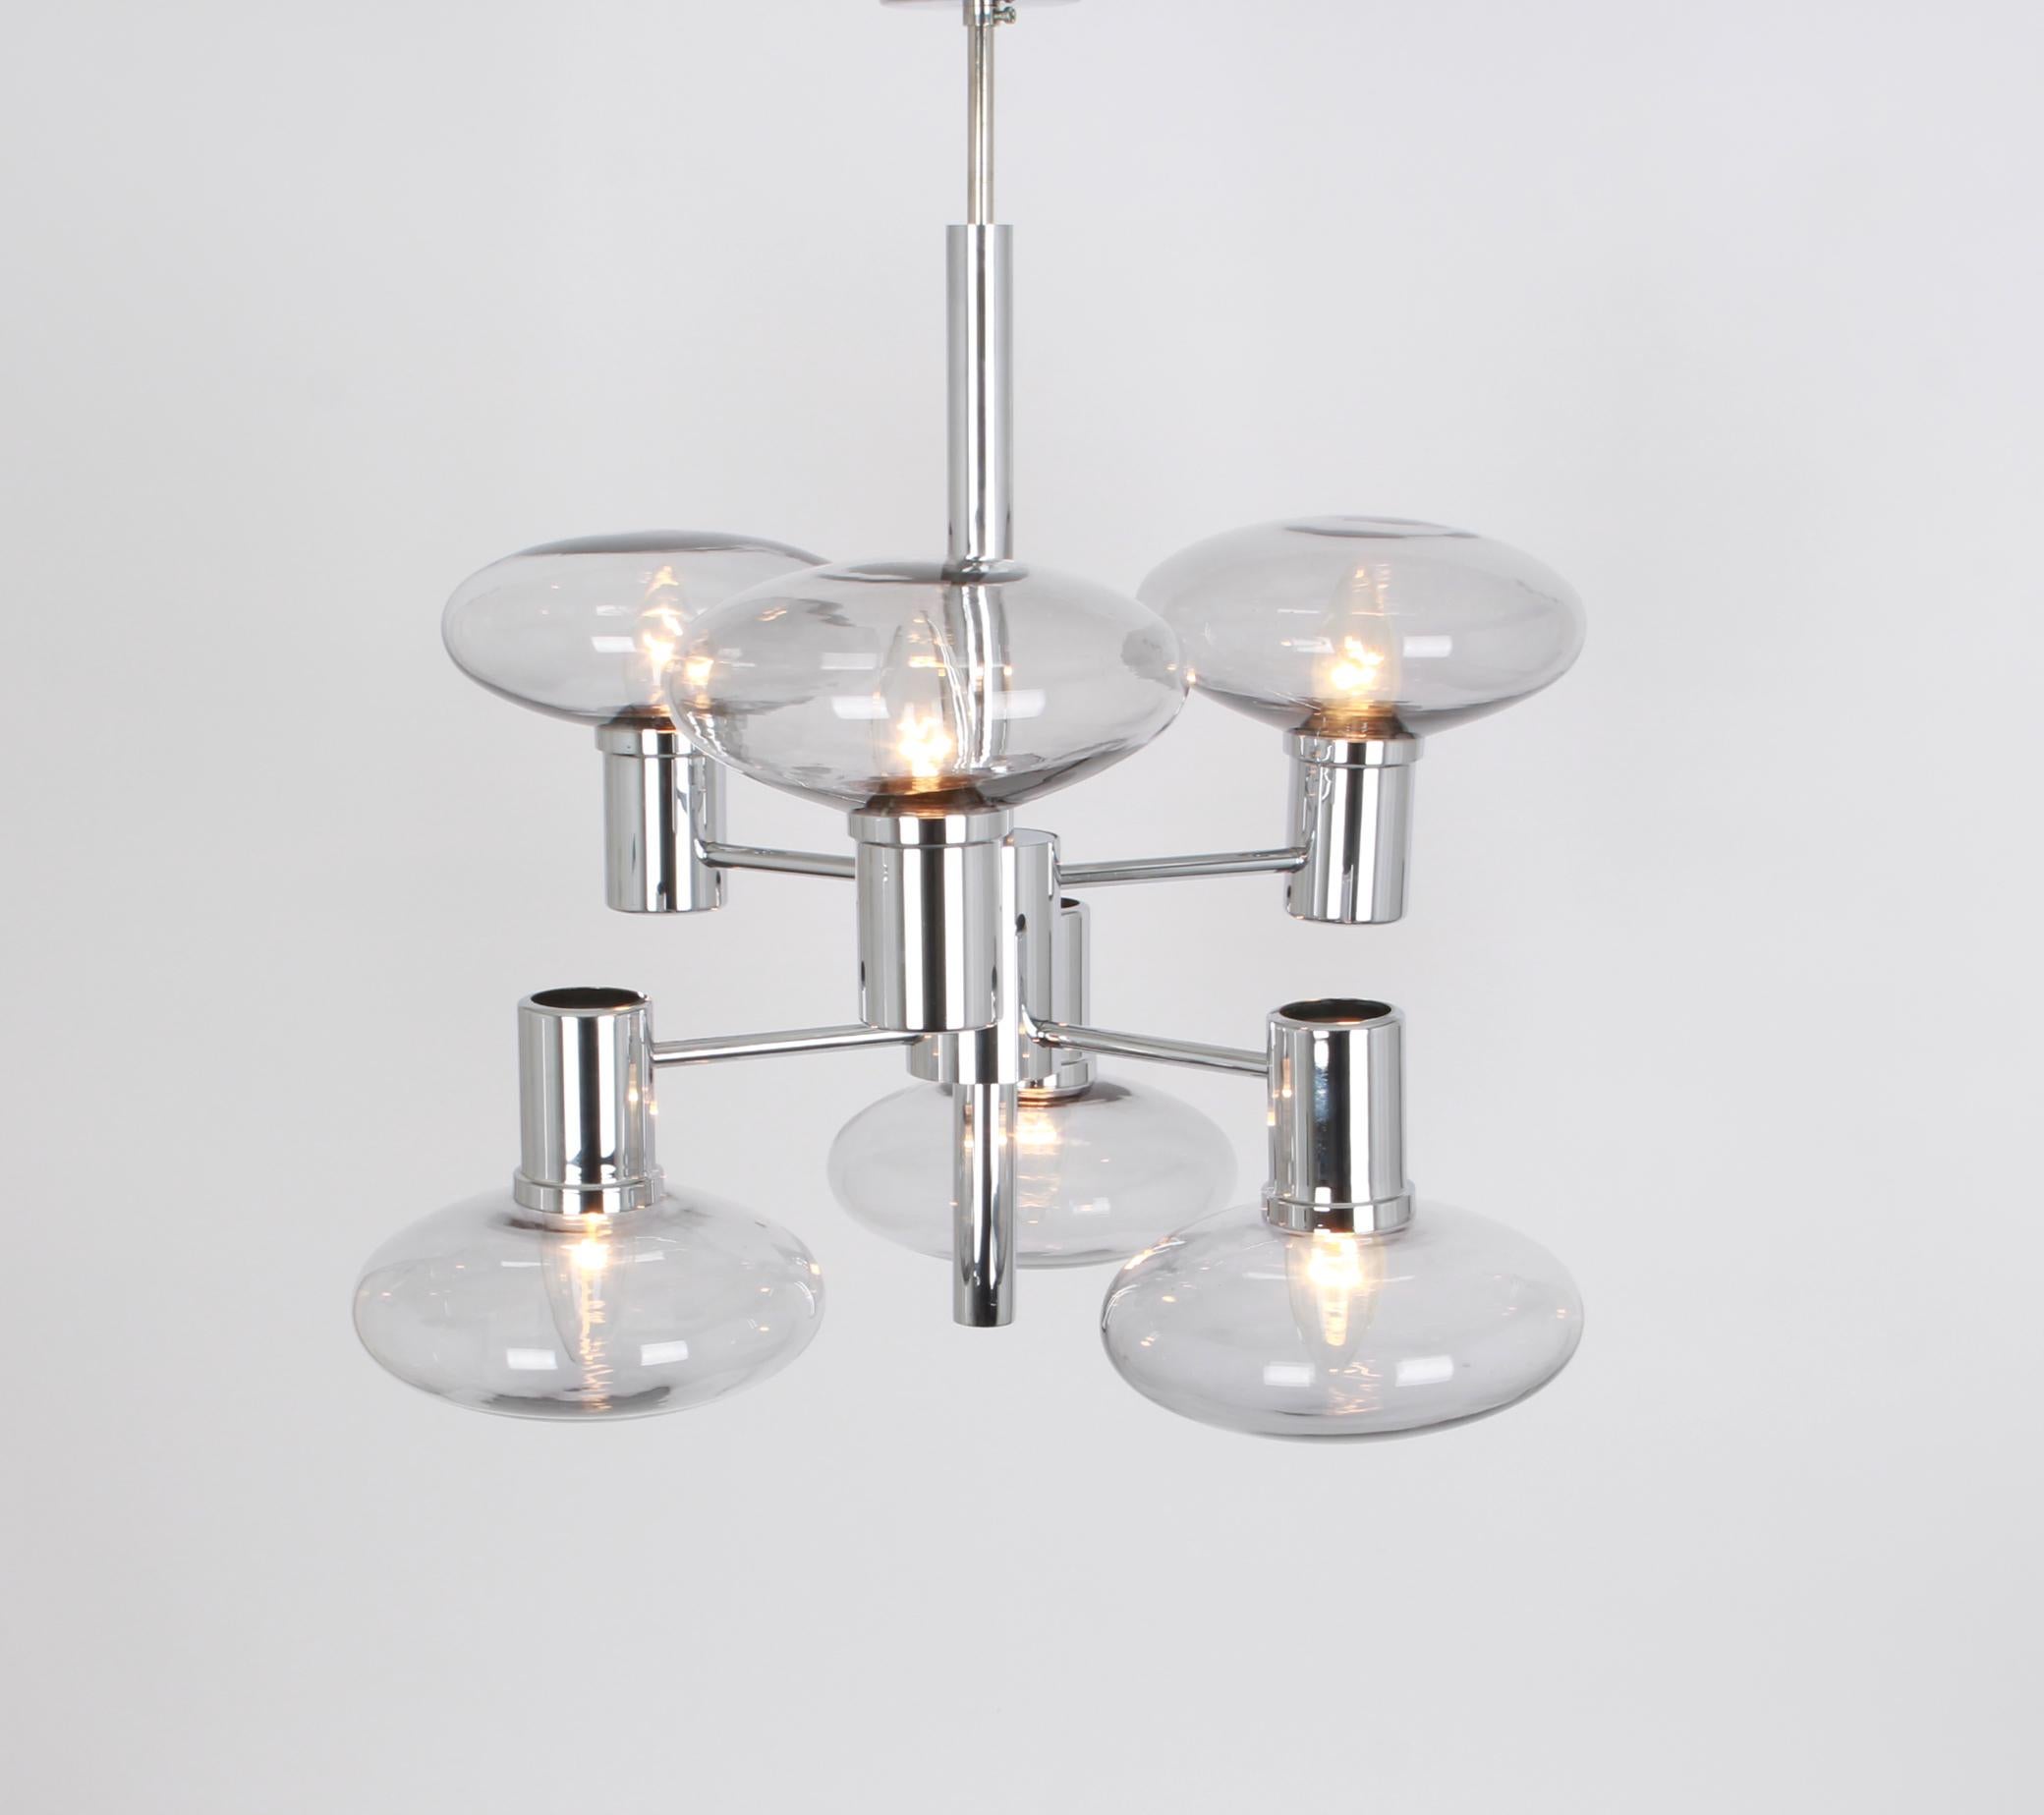 Stunning Chandelier with six smoked glass globes on a chrome frame.
Made by Doria - Wonderful light effect.
Best of the 1960s from Germany.

High quality and in very good condition. Cleaned, well-wired and ready to use. 

The fixture requires